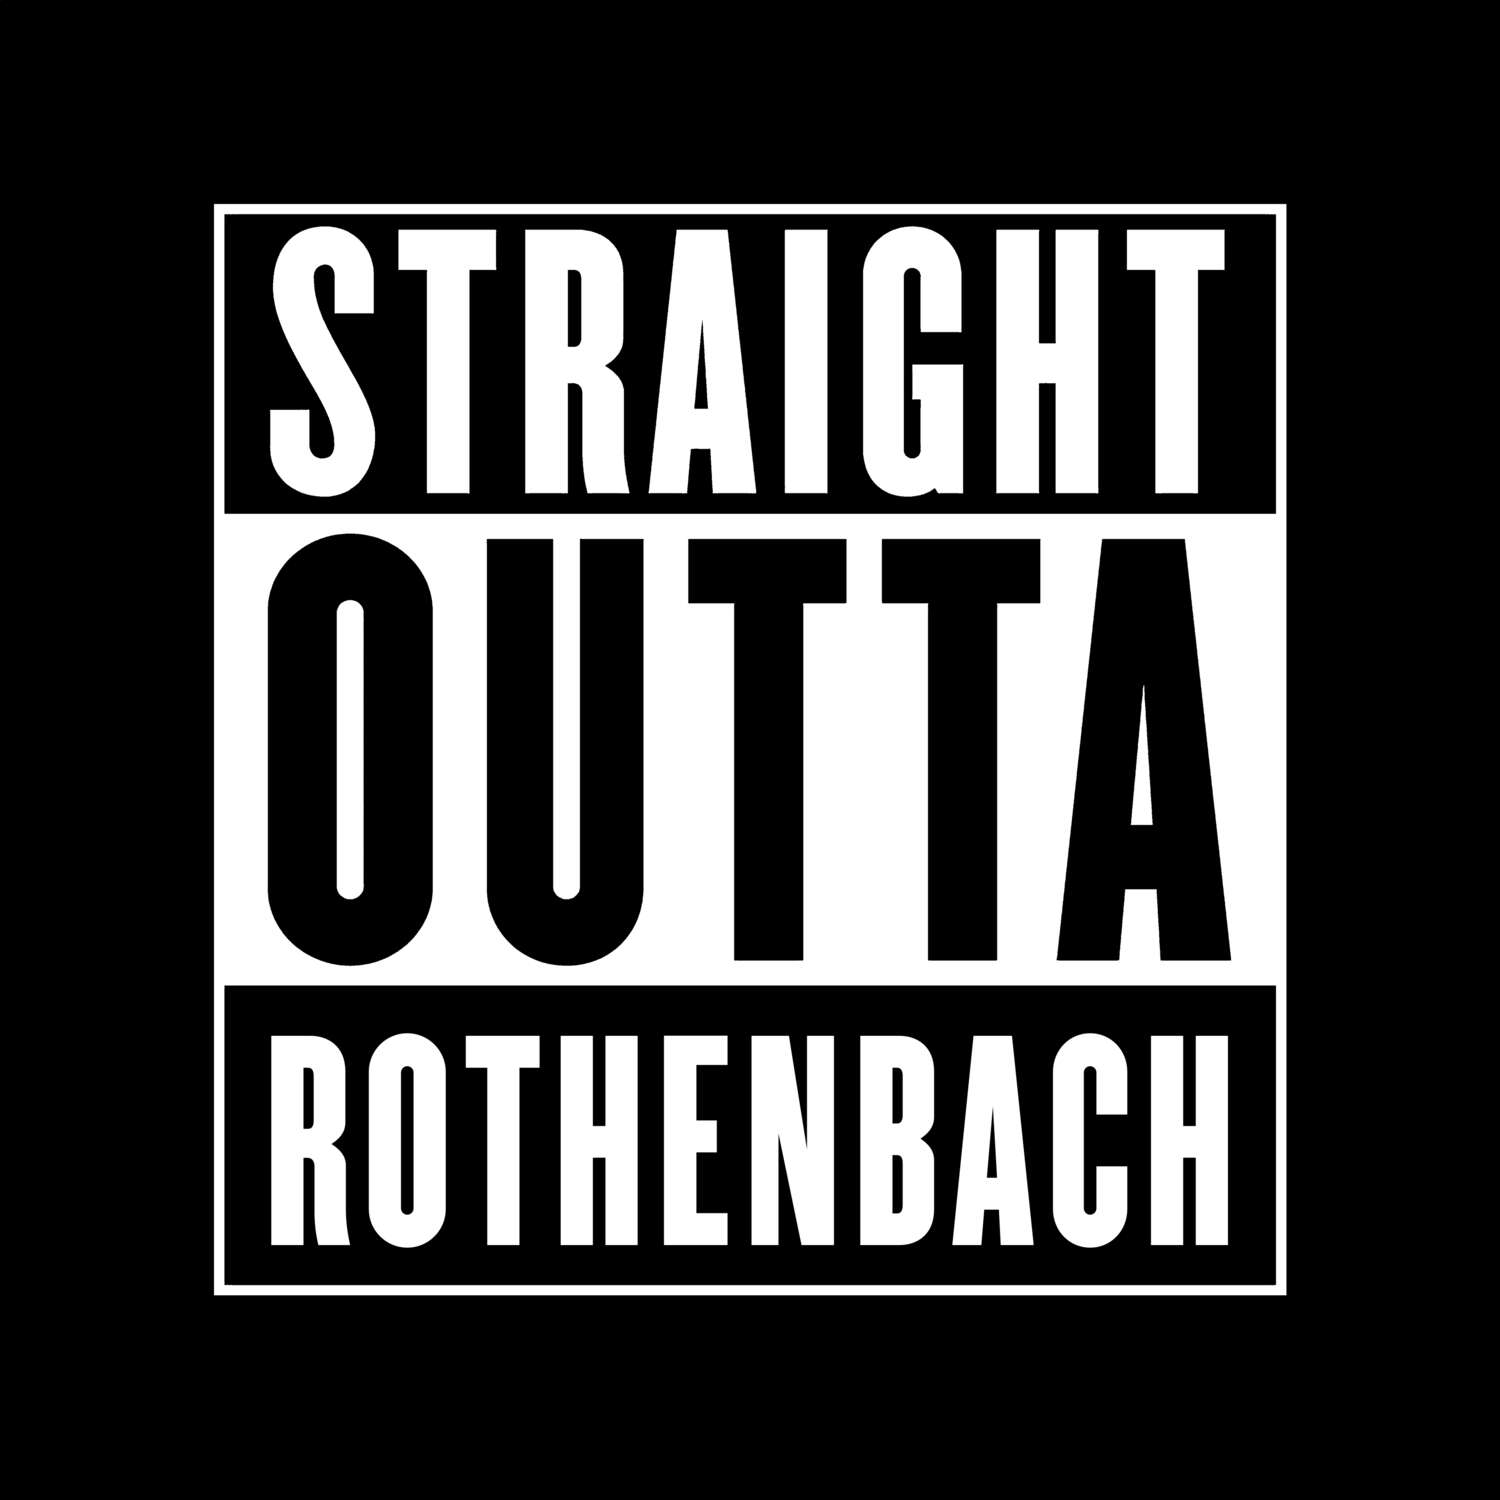 Rothenbach T-Shirt »Straight Outta«